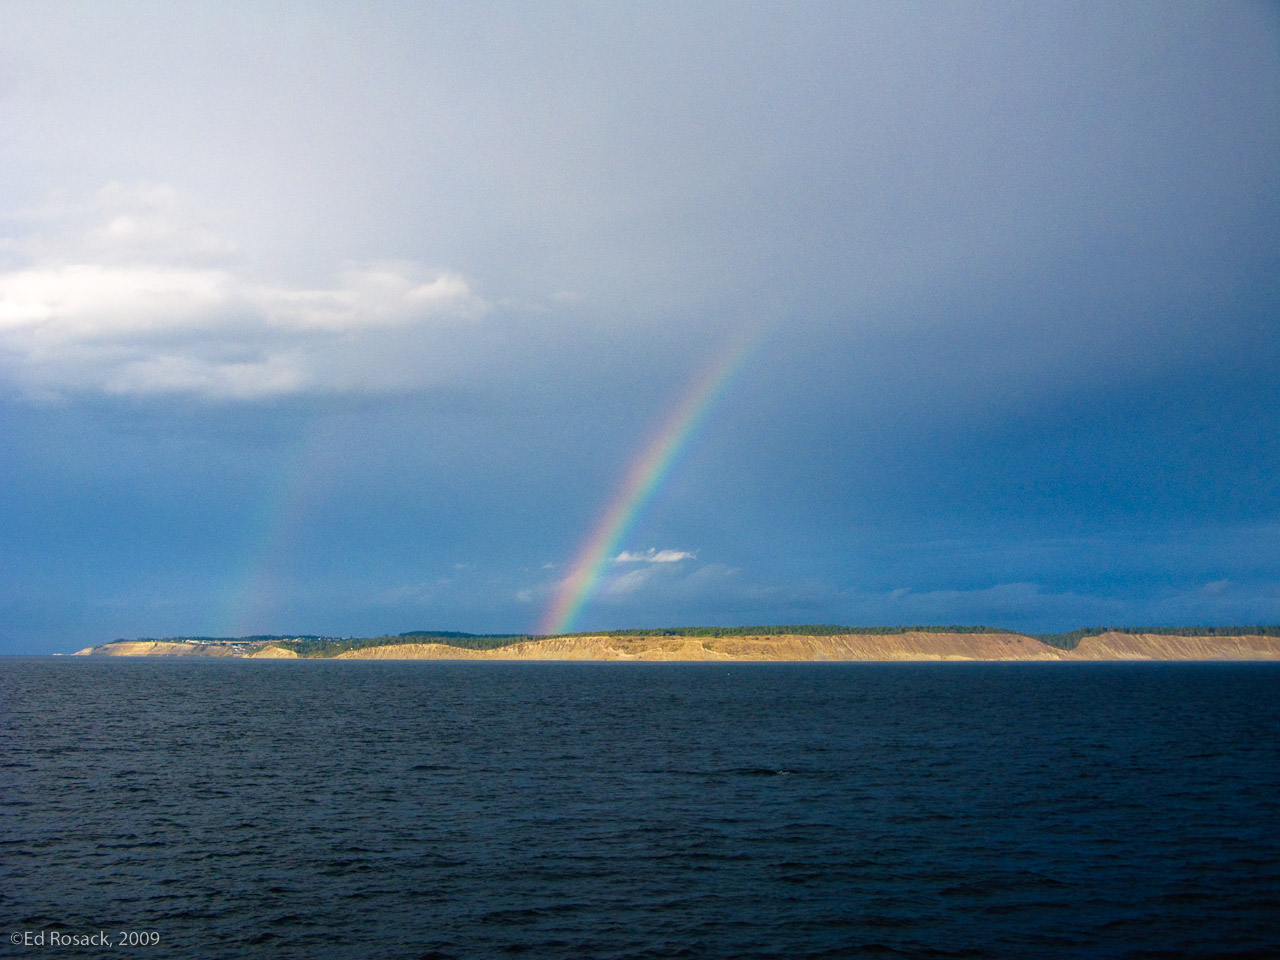 Double rainbow- We saw this double rainbow when leaving Seattle on our Alaska cruise.